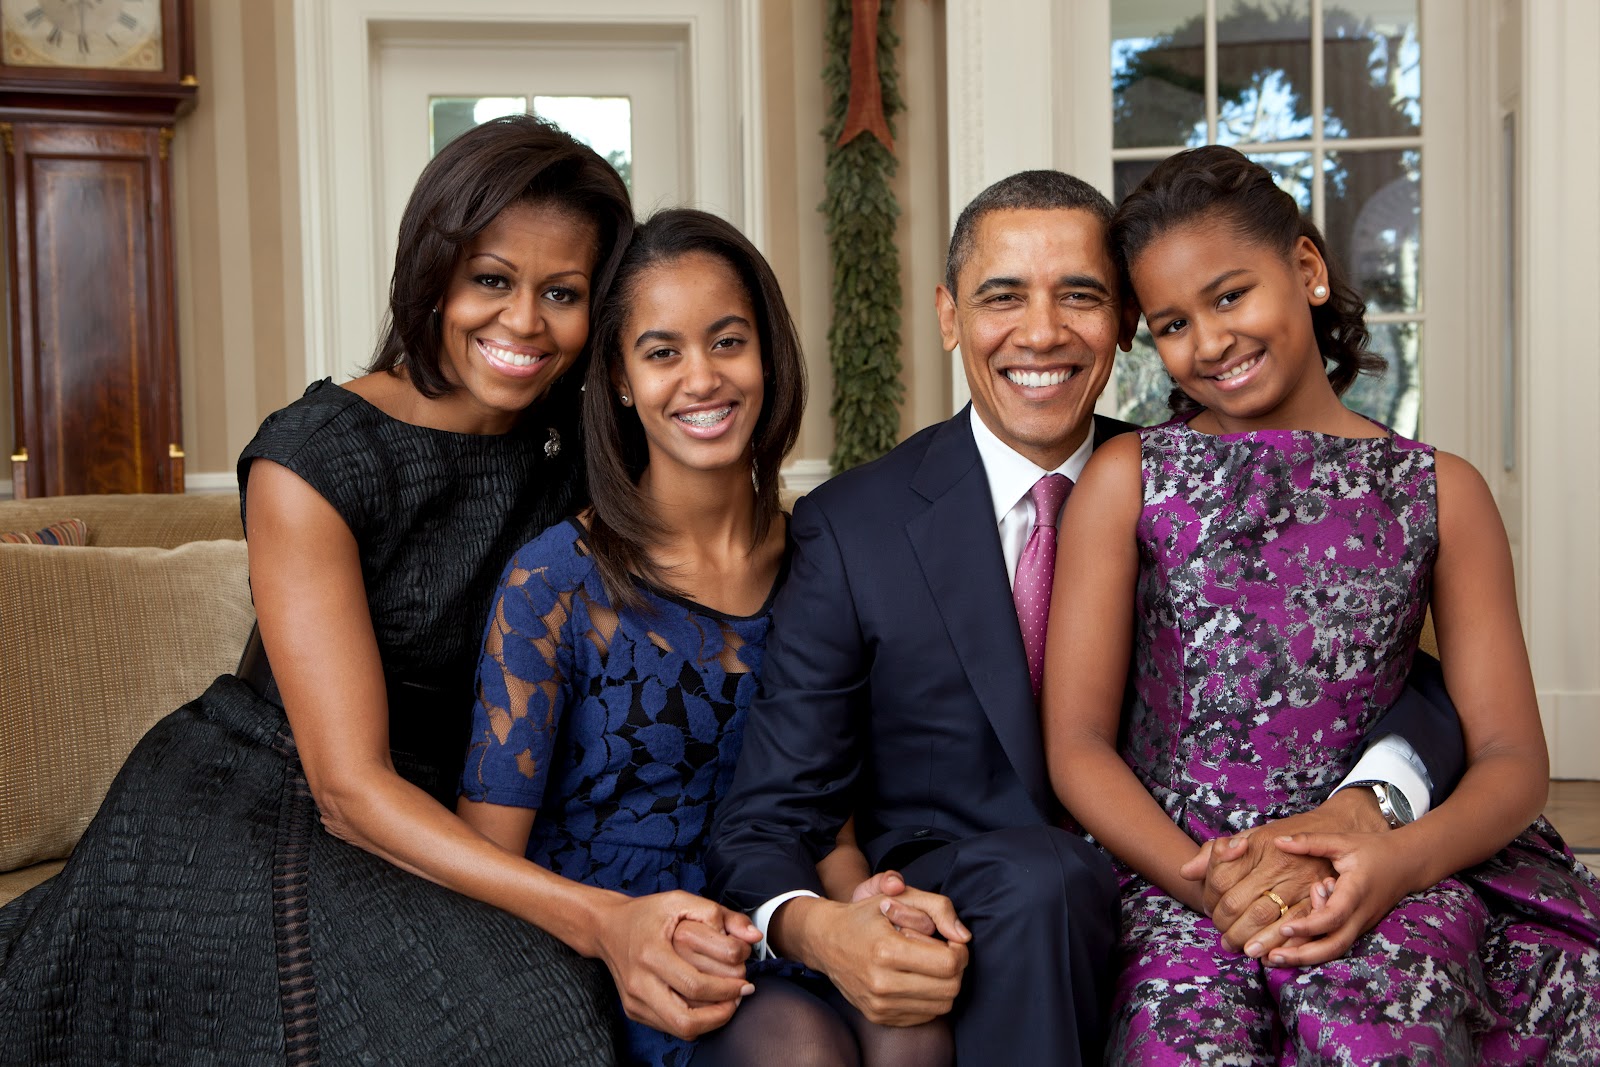 Obama His Family HD Wallpaper Photos In High Quality